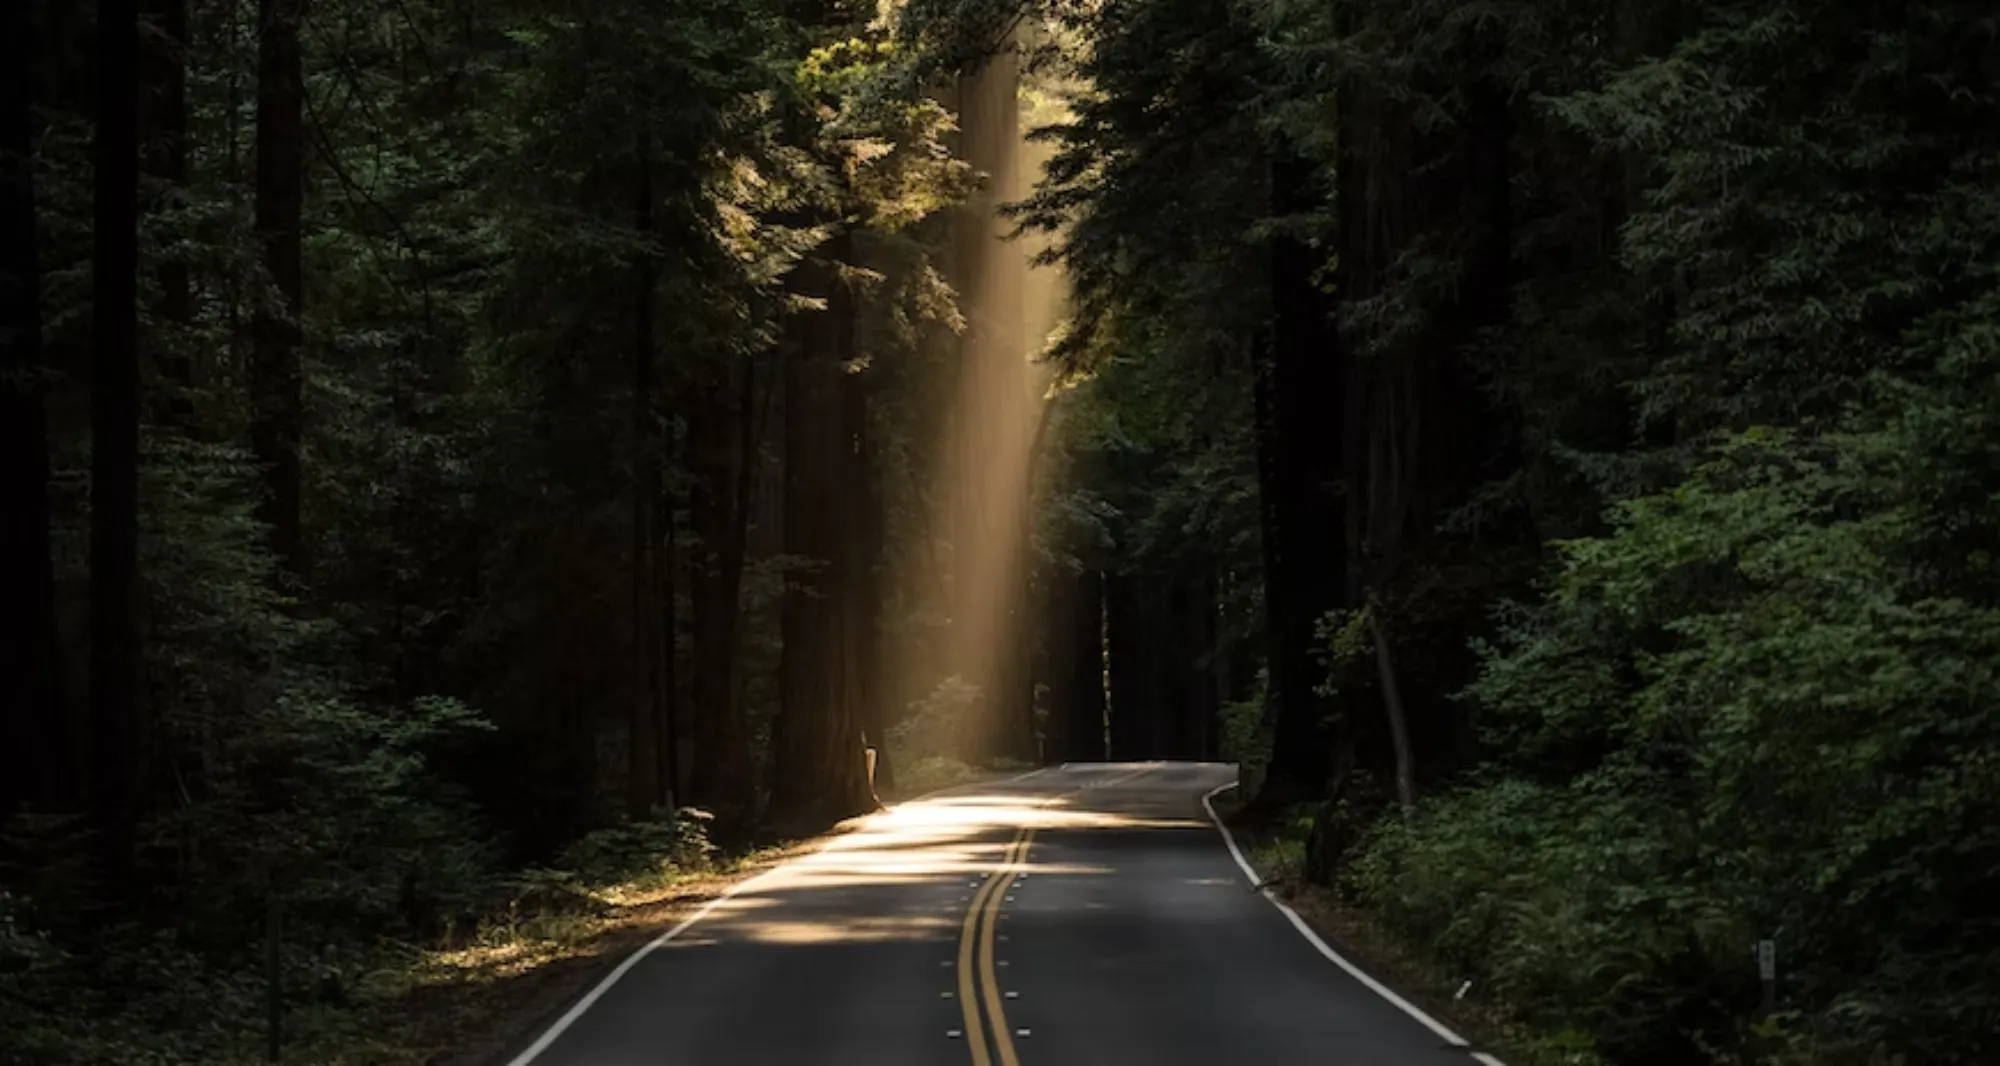 A ray of sunlight filtering through a heavy forest canopy of trees onto a paved road.